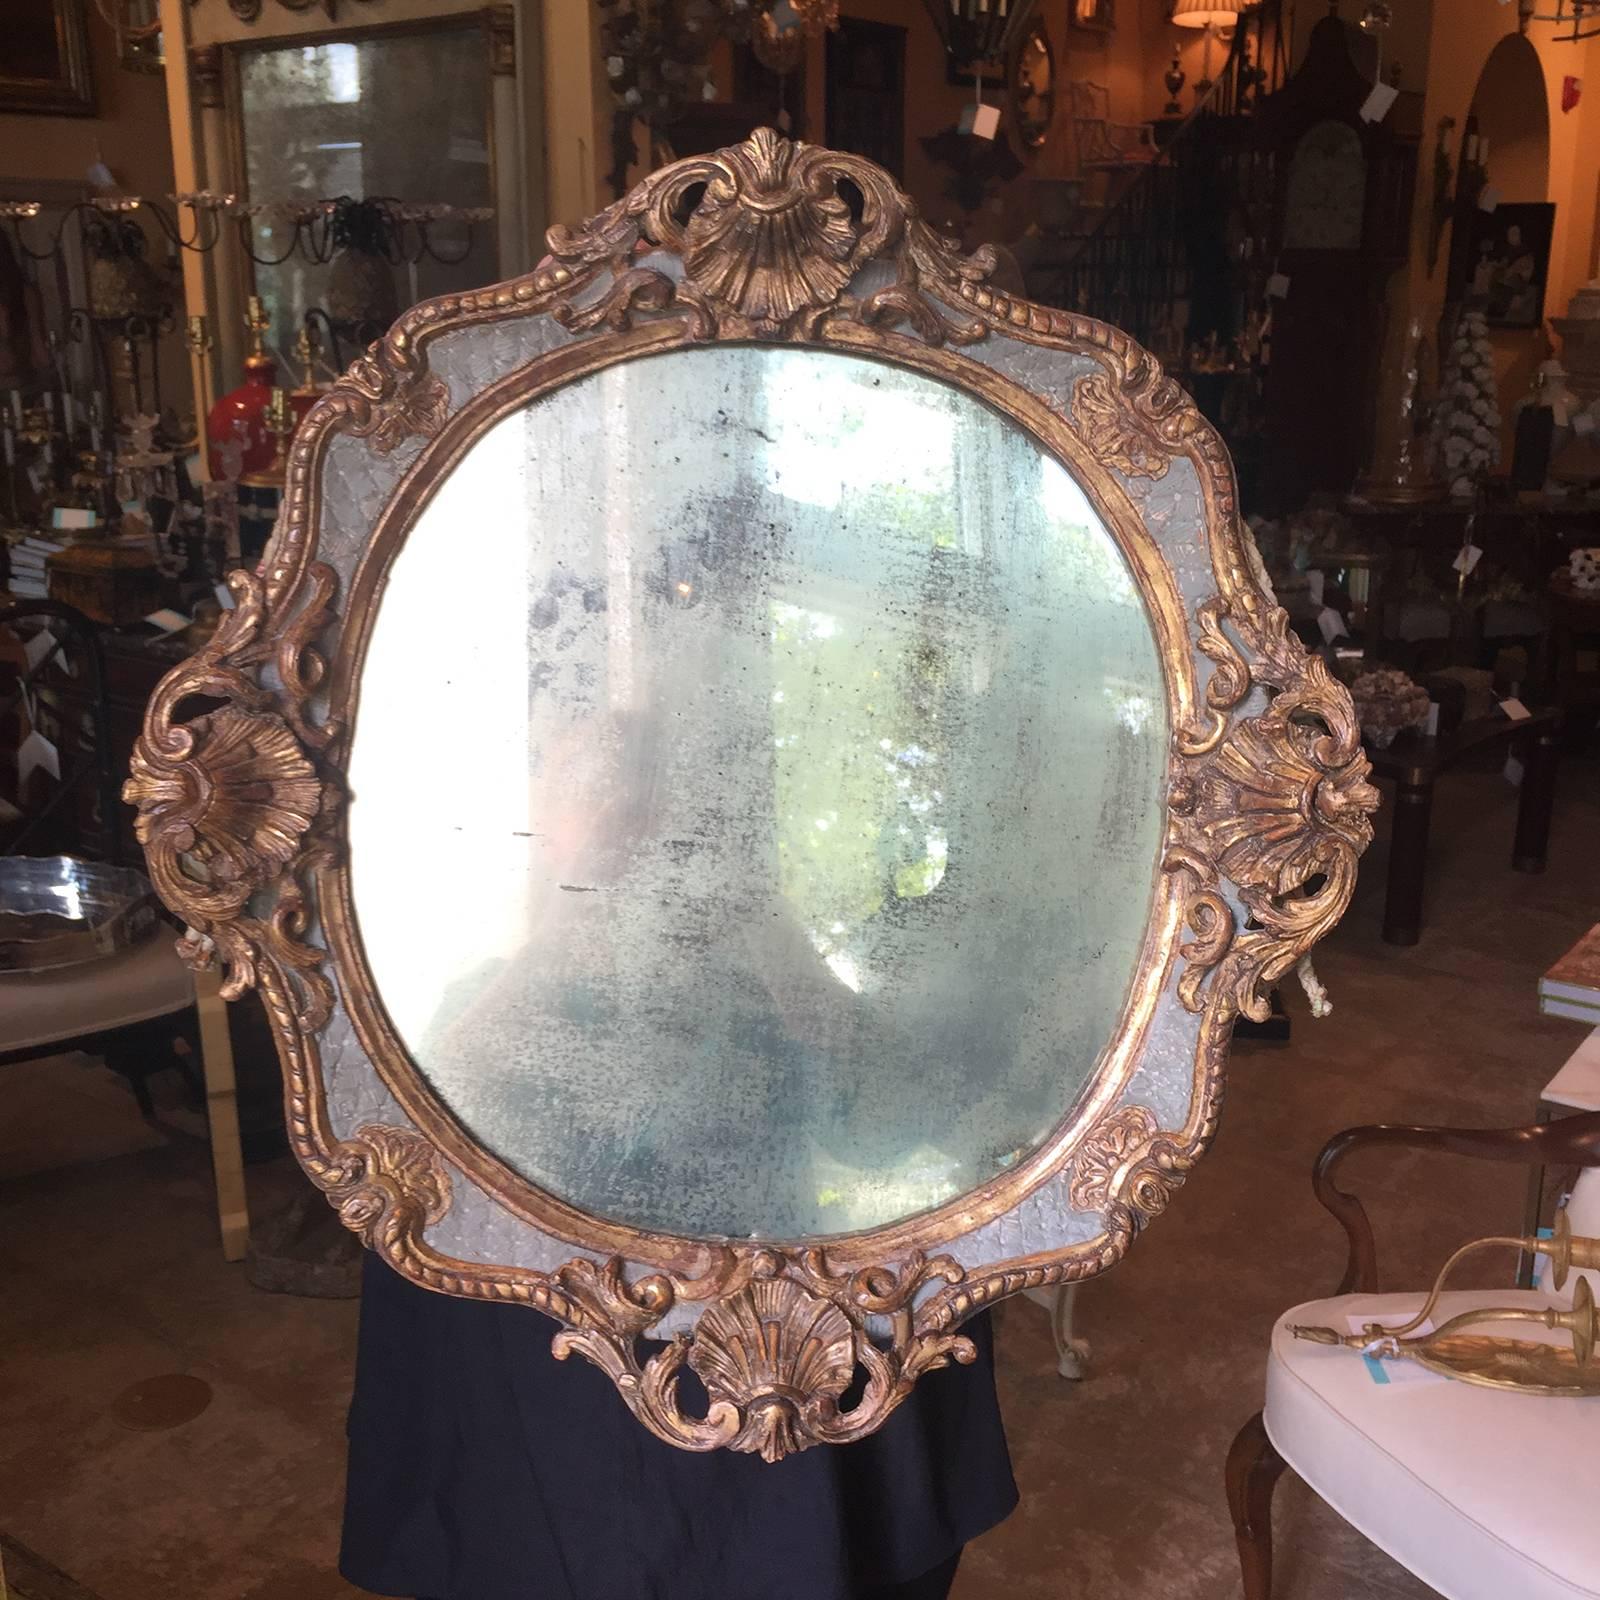 18th-19th century continental probably French mirror, Exquisite charming from a wonderful collector.